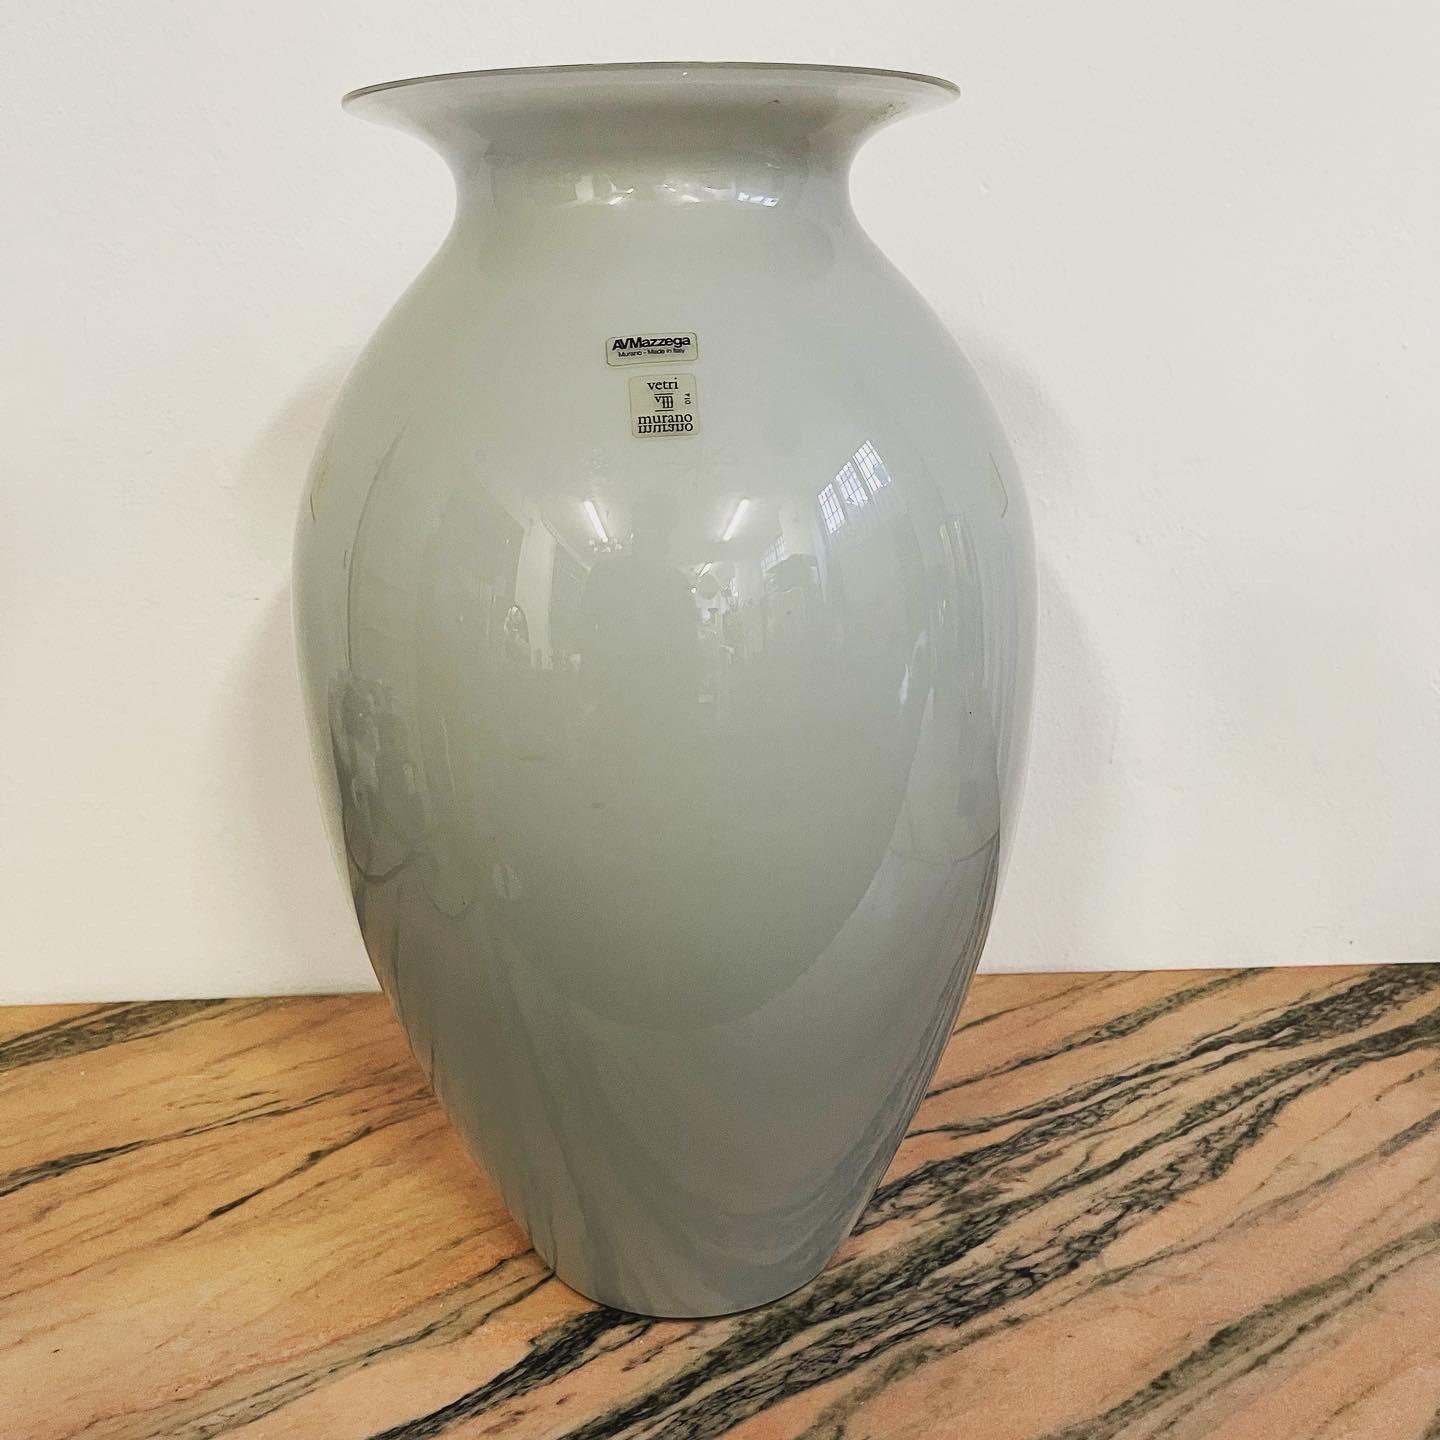 The elegant gray opaline glass vase from the Murano glassworks AVMazzega is a stunning work of glass art, made of high-quality opaline glass. The vase is large in size, making it an imposing presence in any room, and features a classic yet curvy